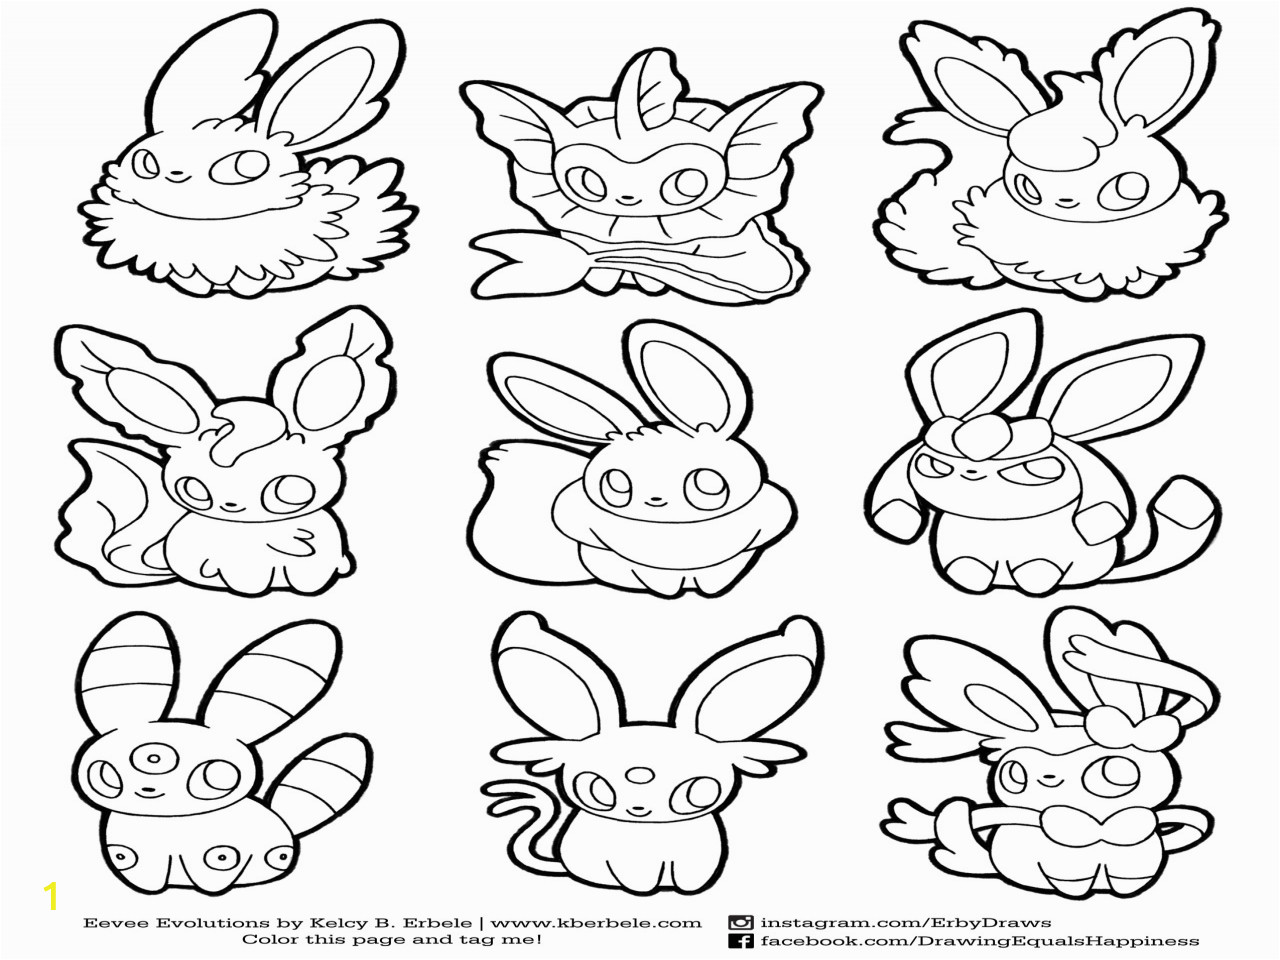 eeveelutions coloring pages